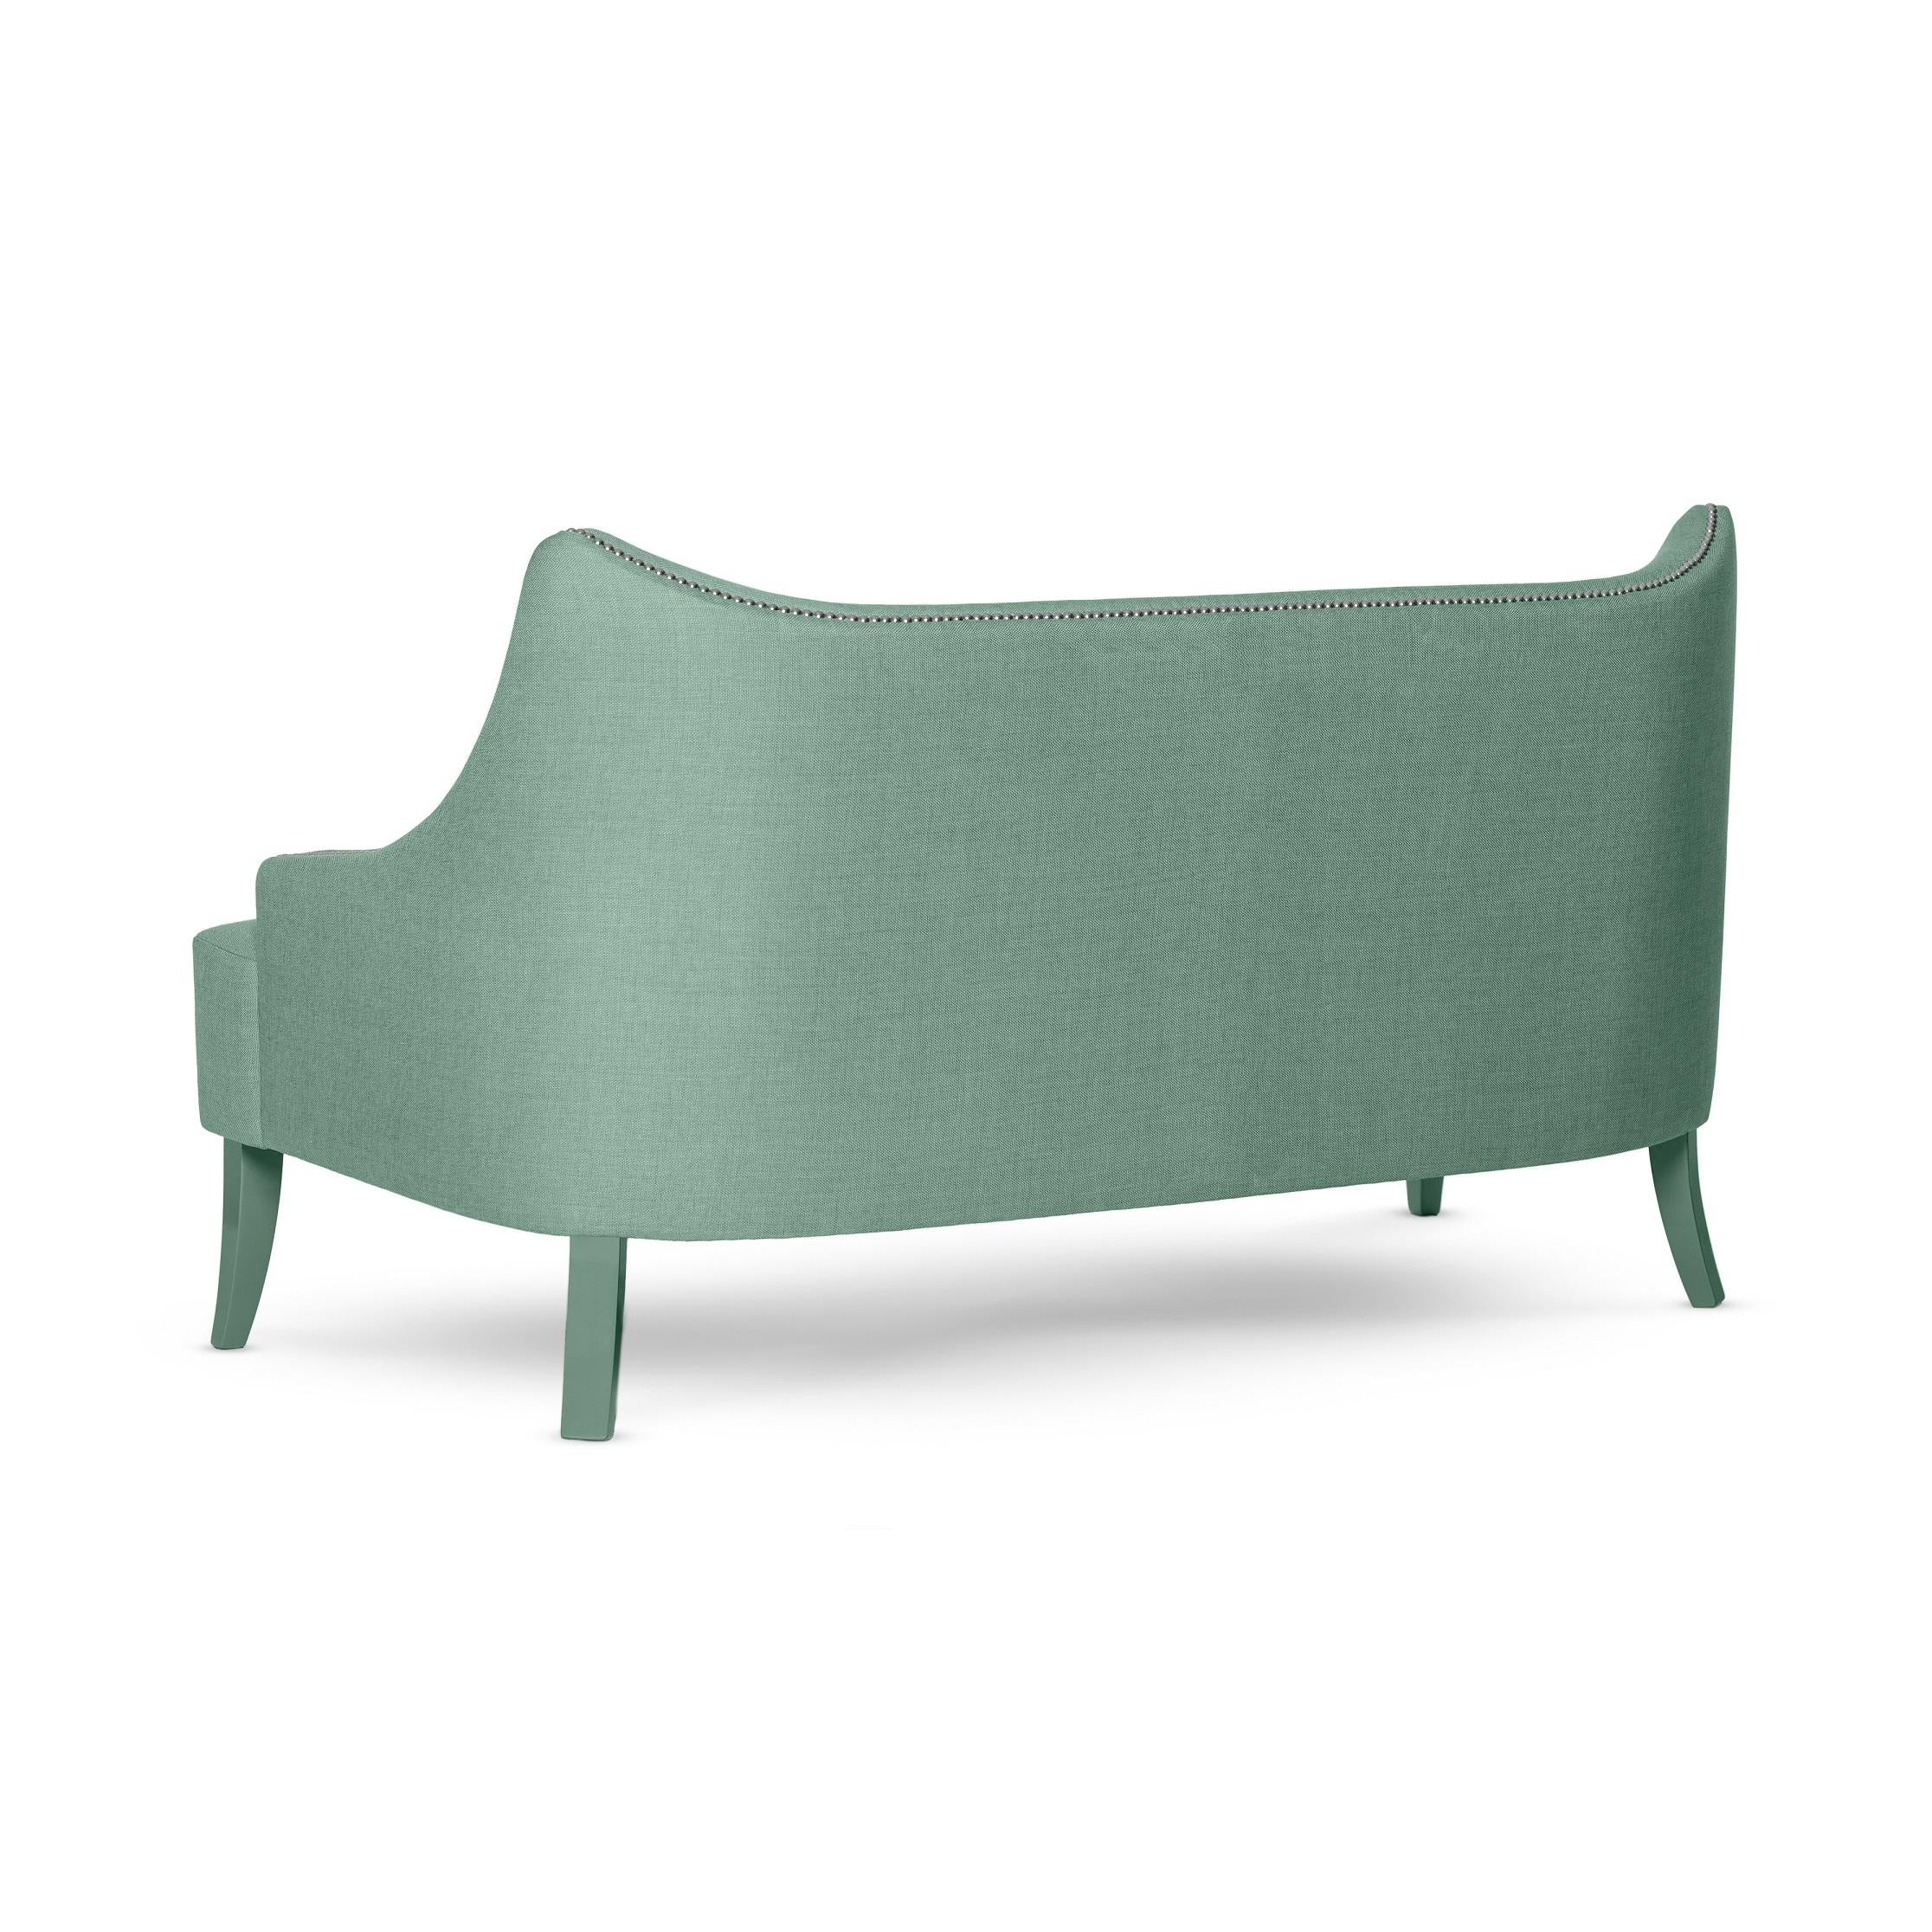 Midcentury Modern Style Loveseat In Cotton Velvet In New Condition For Sale In New York, NY